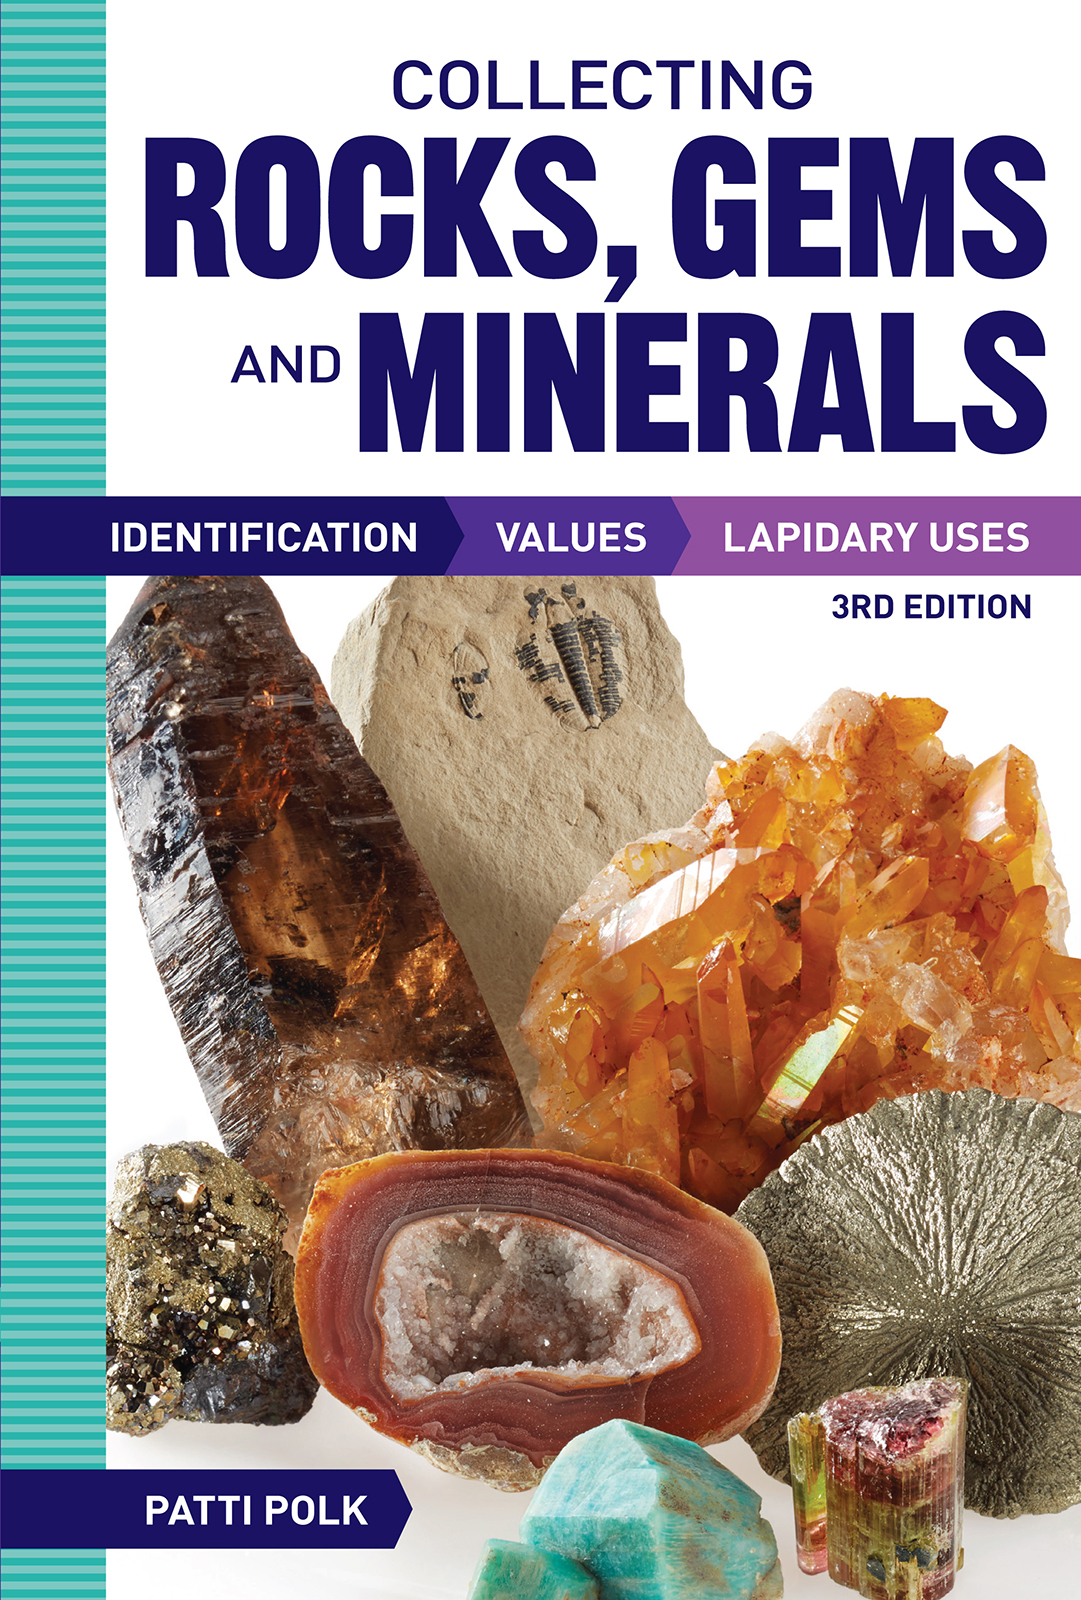 Contents Foreword The fantastic world of minerals precious stones and fossils - photo 1